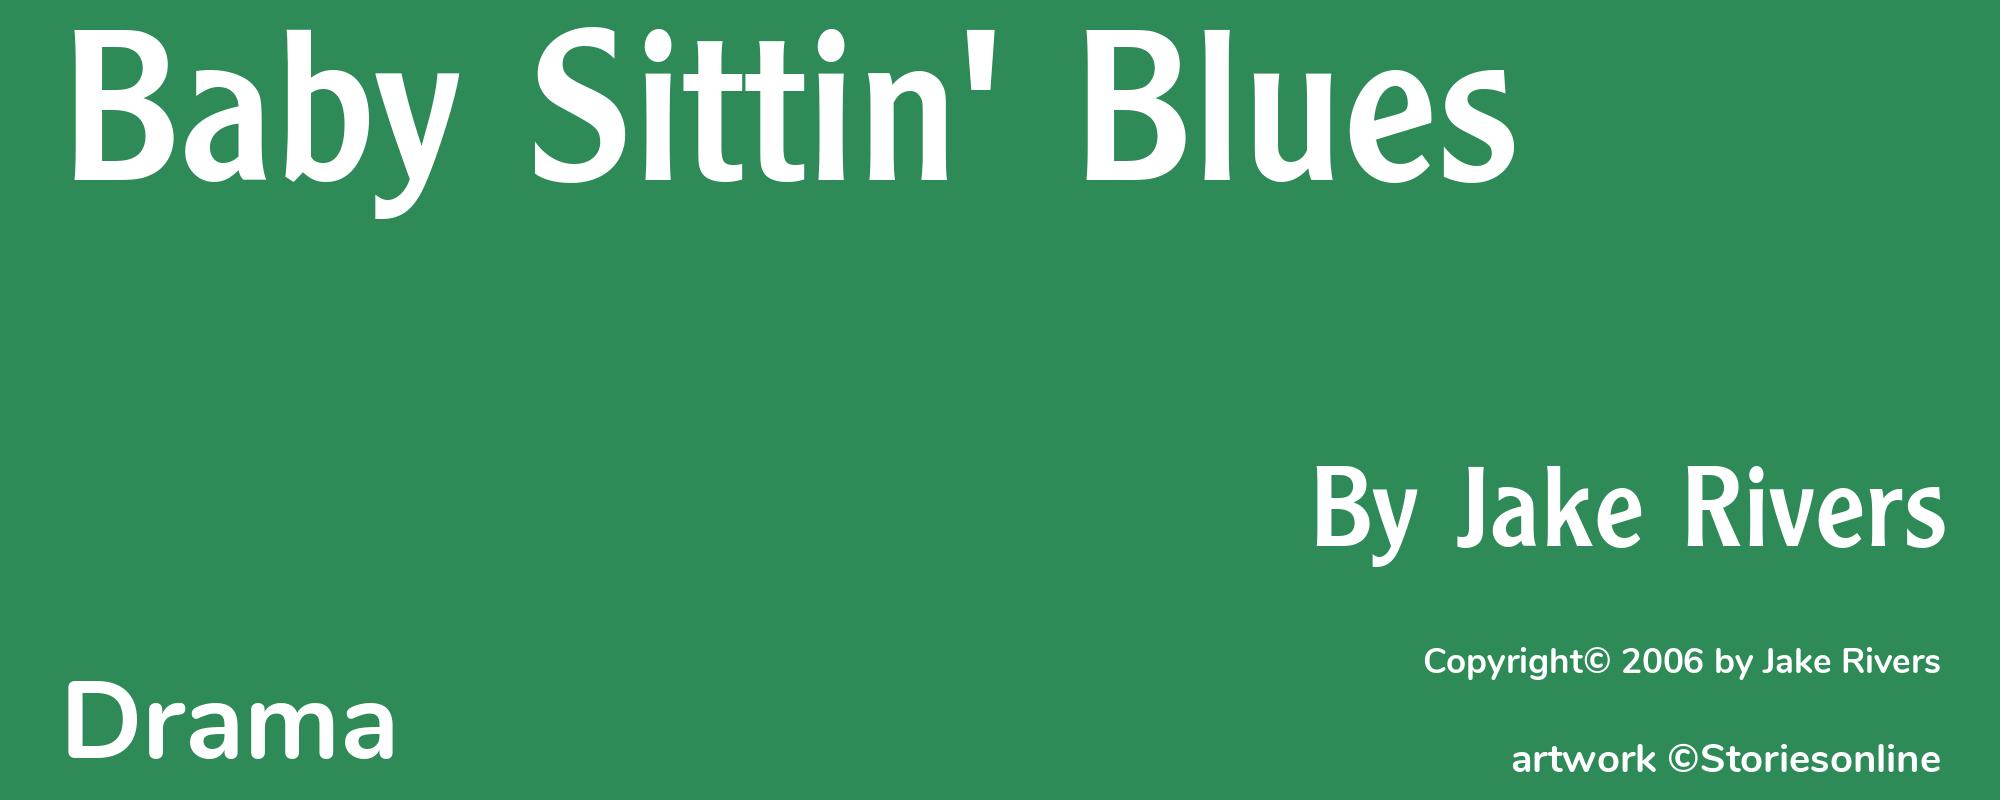 Baby Sittin' Blues - Cover